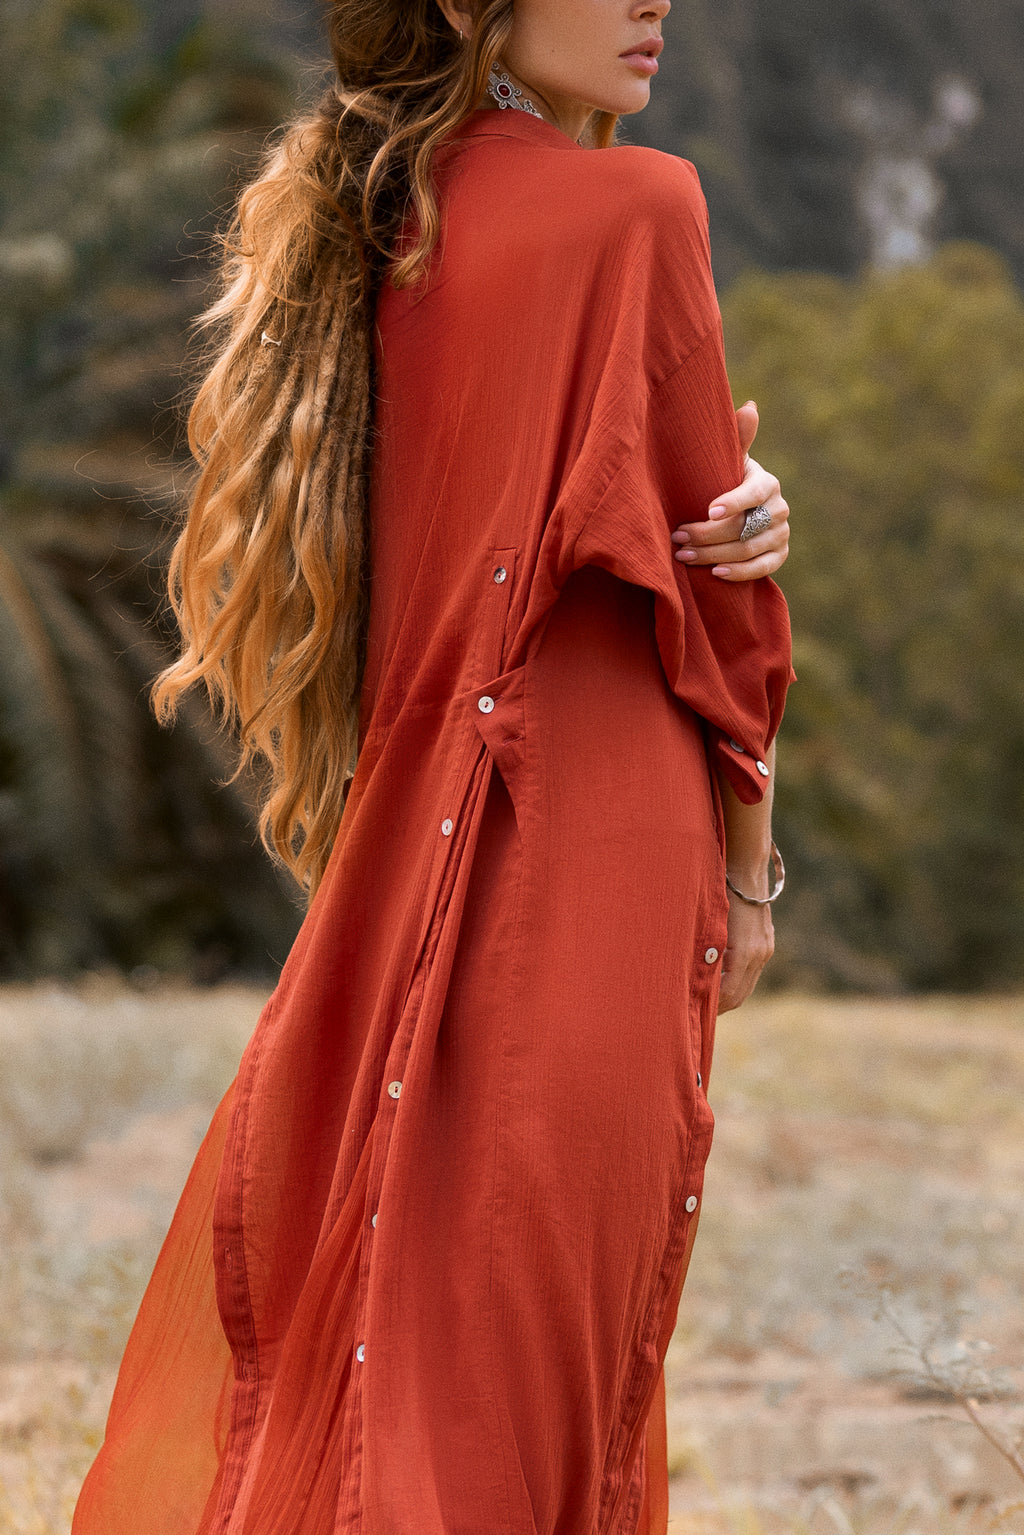 Organic Chic: Boho Long Sleeves Kaftan – Red Kannika Shirt Dress in silk chiffon and crinkle cotton, designed with adjustable buttons for a customizable and comfortable fit